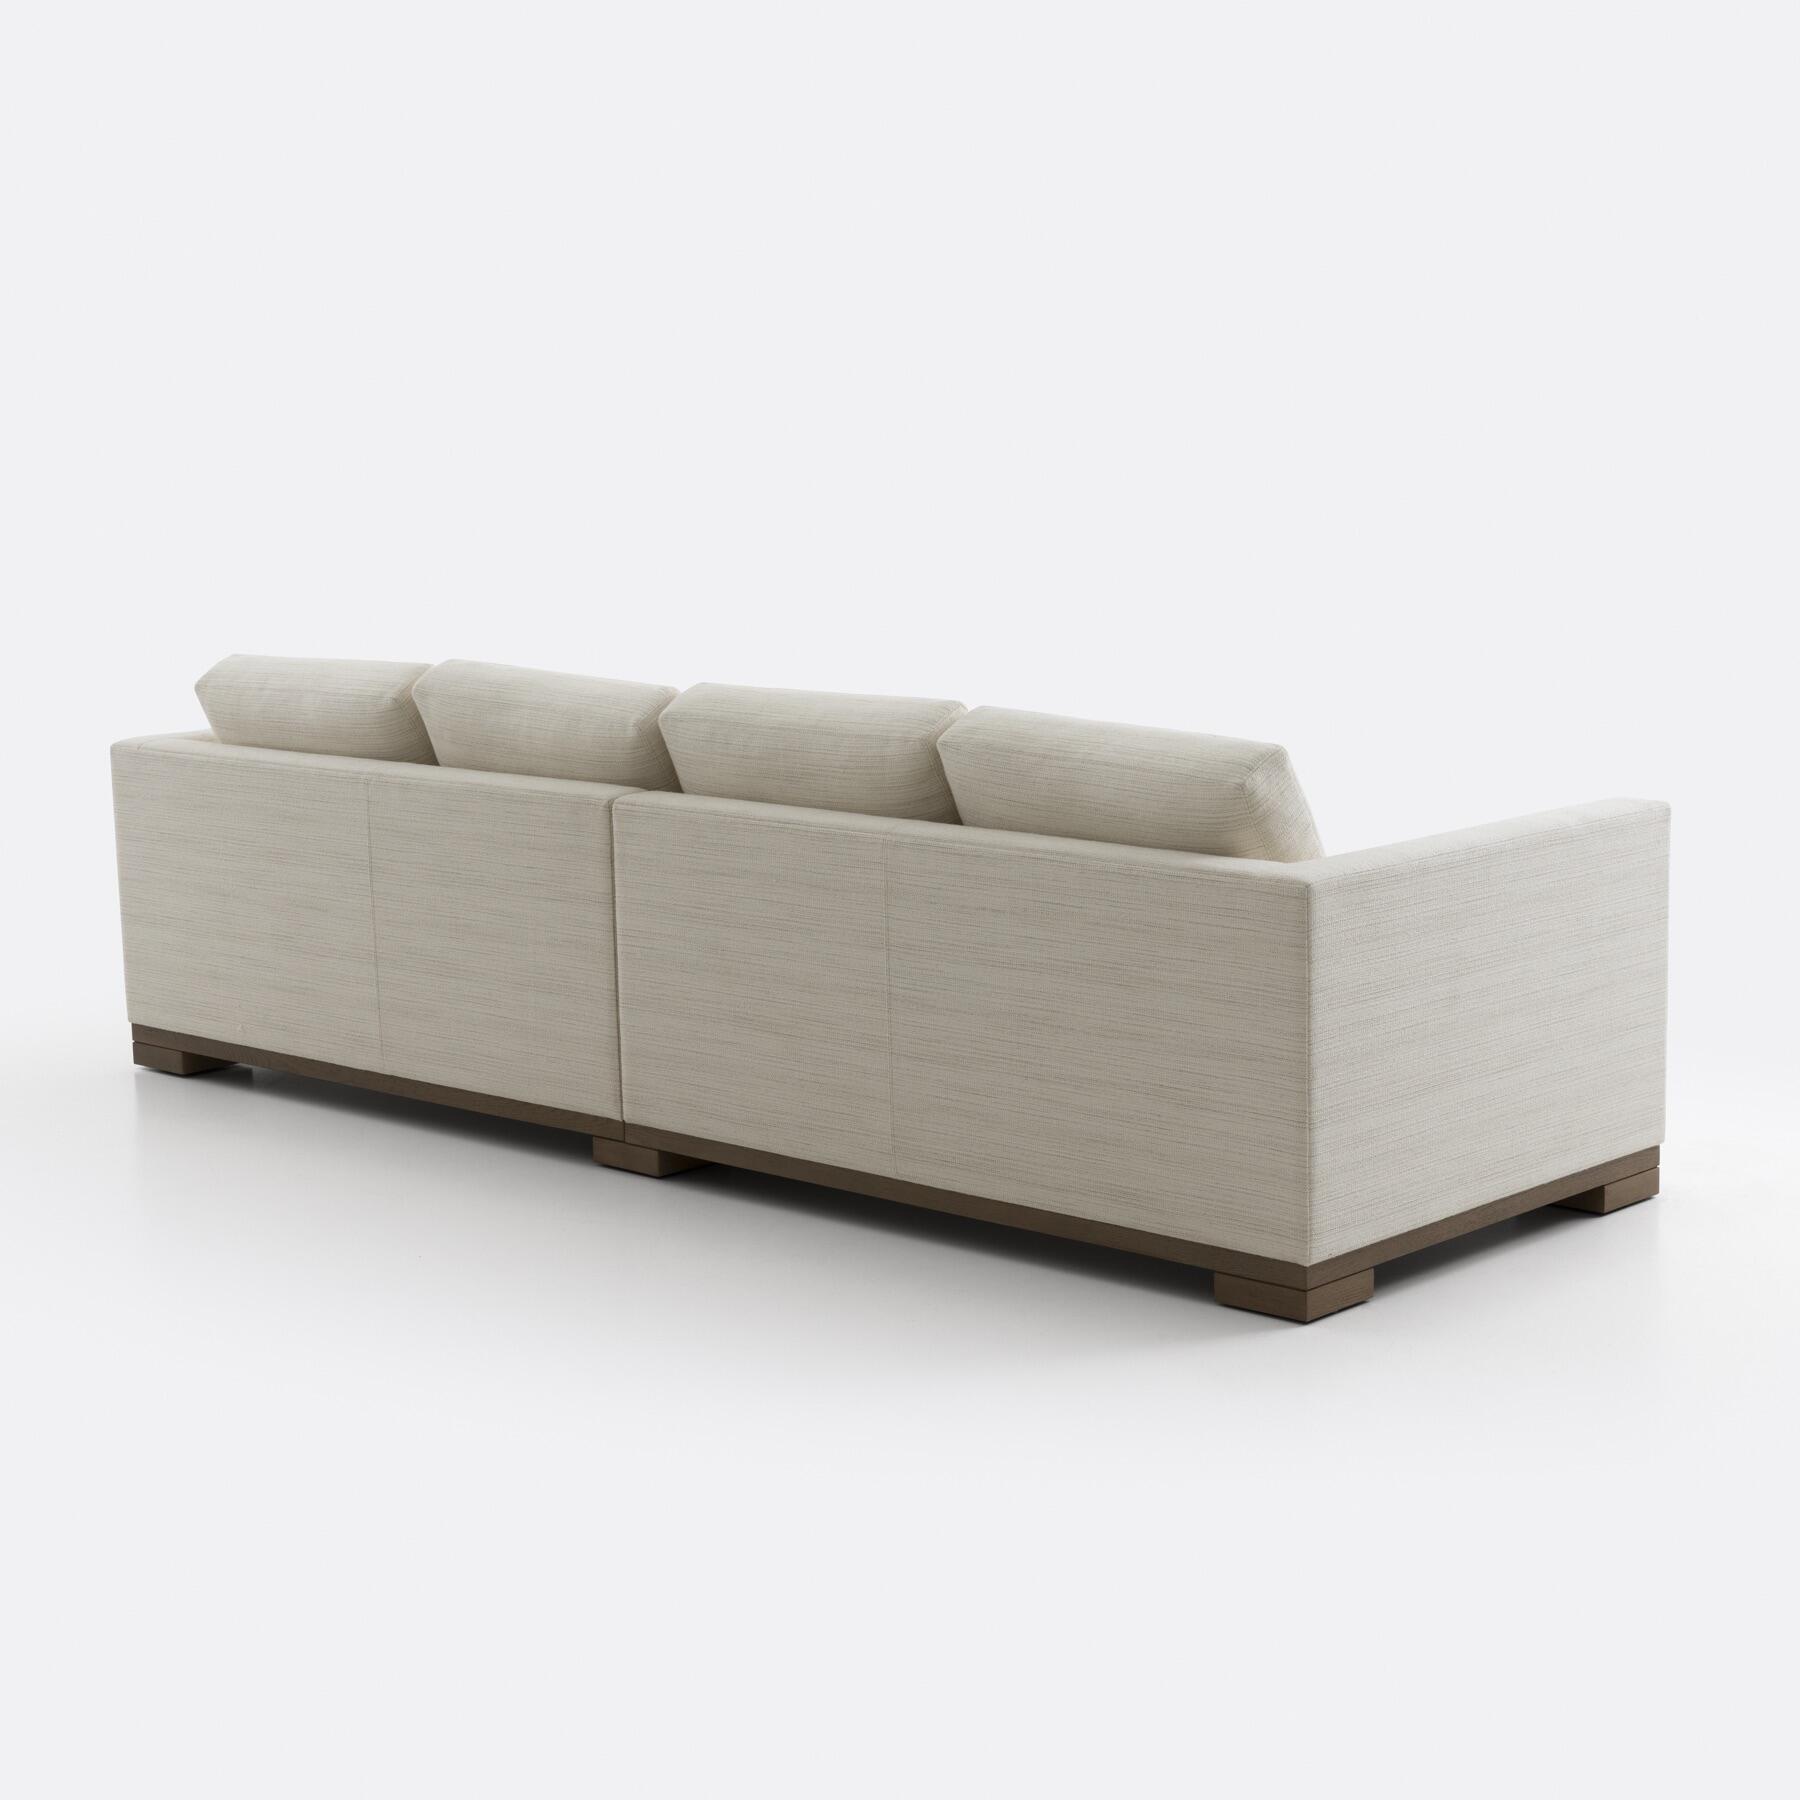 906 Sofa, 120 in, Oak Wheat, Afternoon Drive: Soft Light